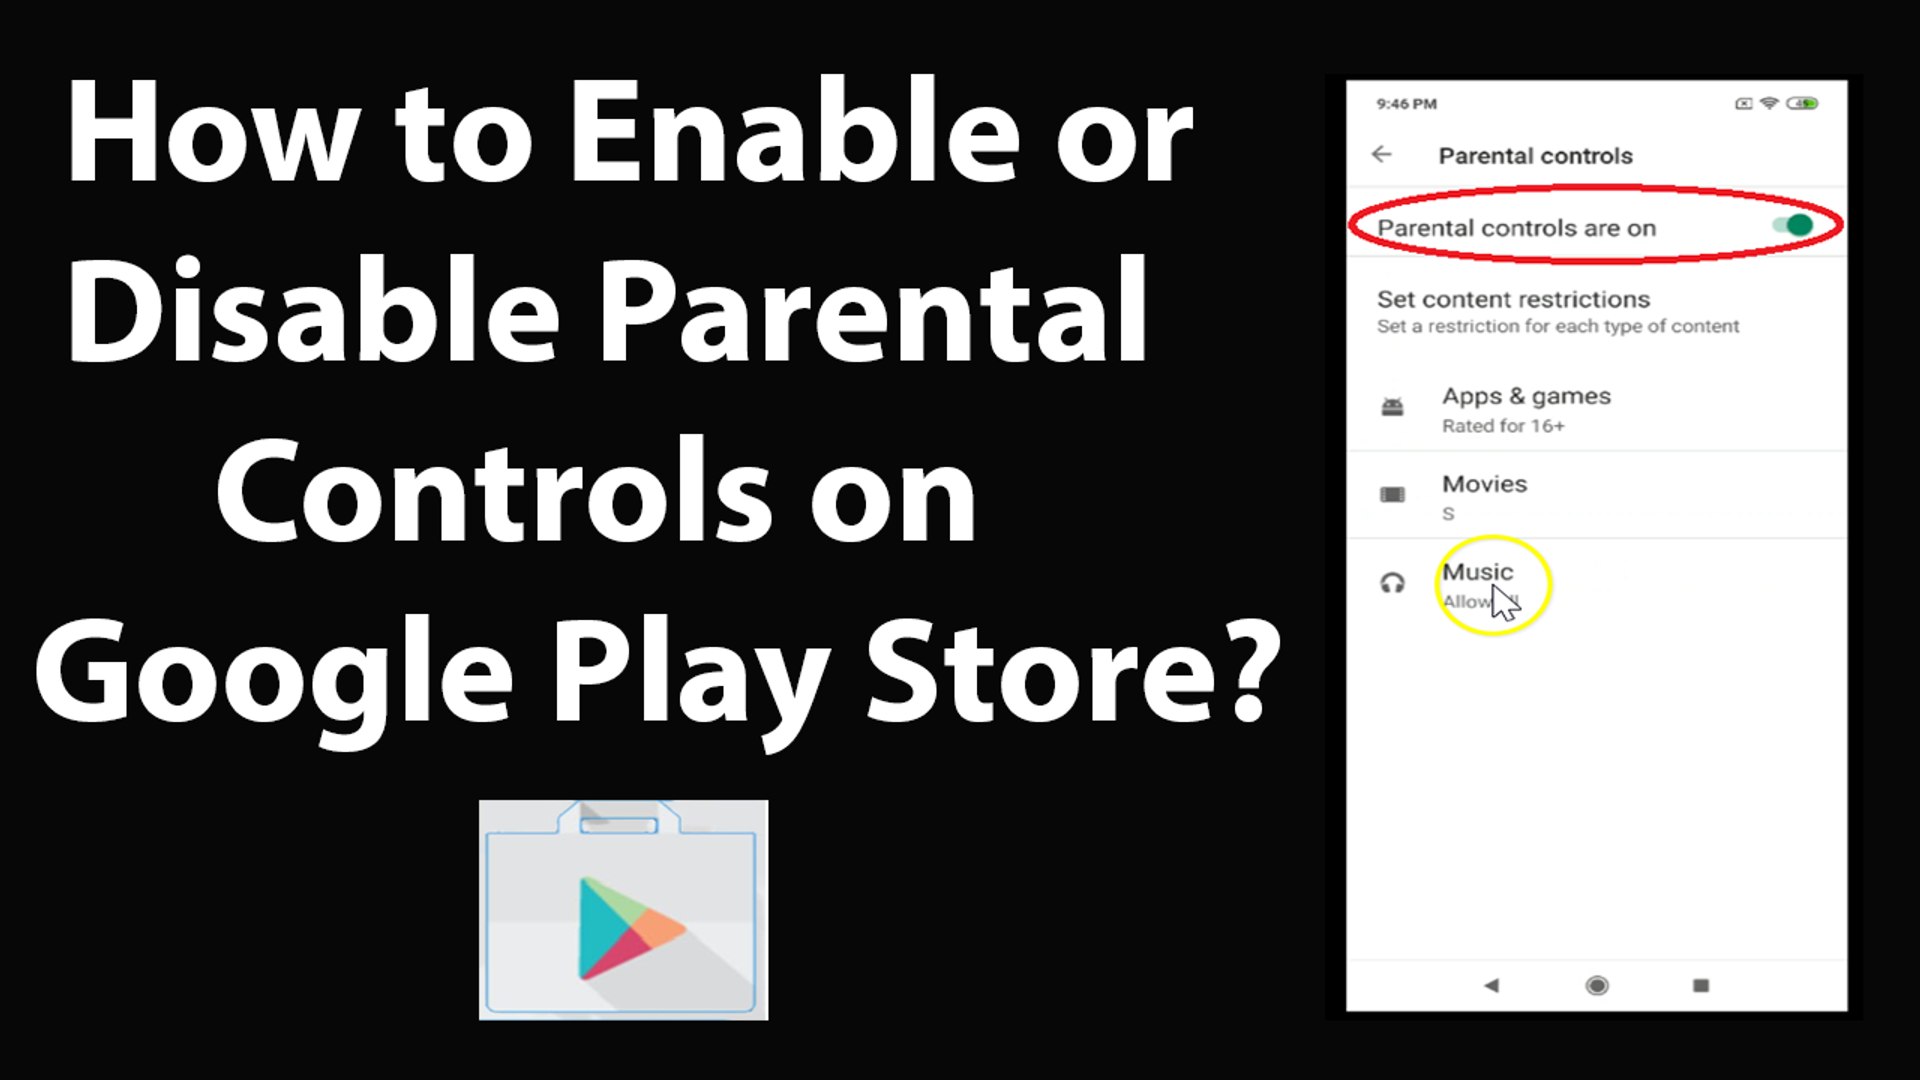 How to Enable or Disable Parental Controls on Google Play Store?